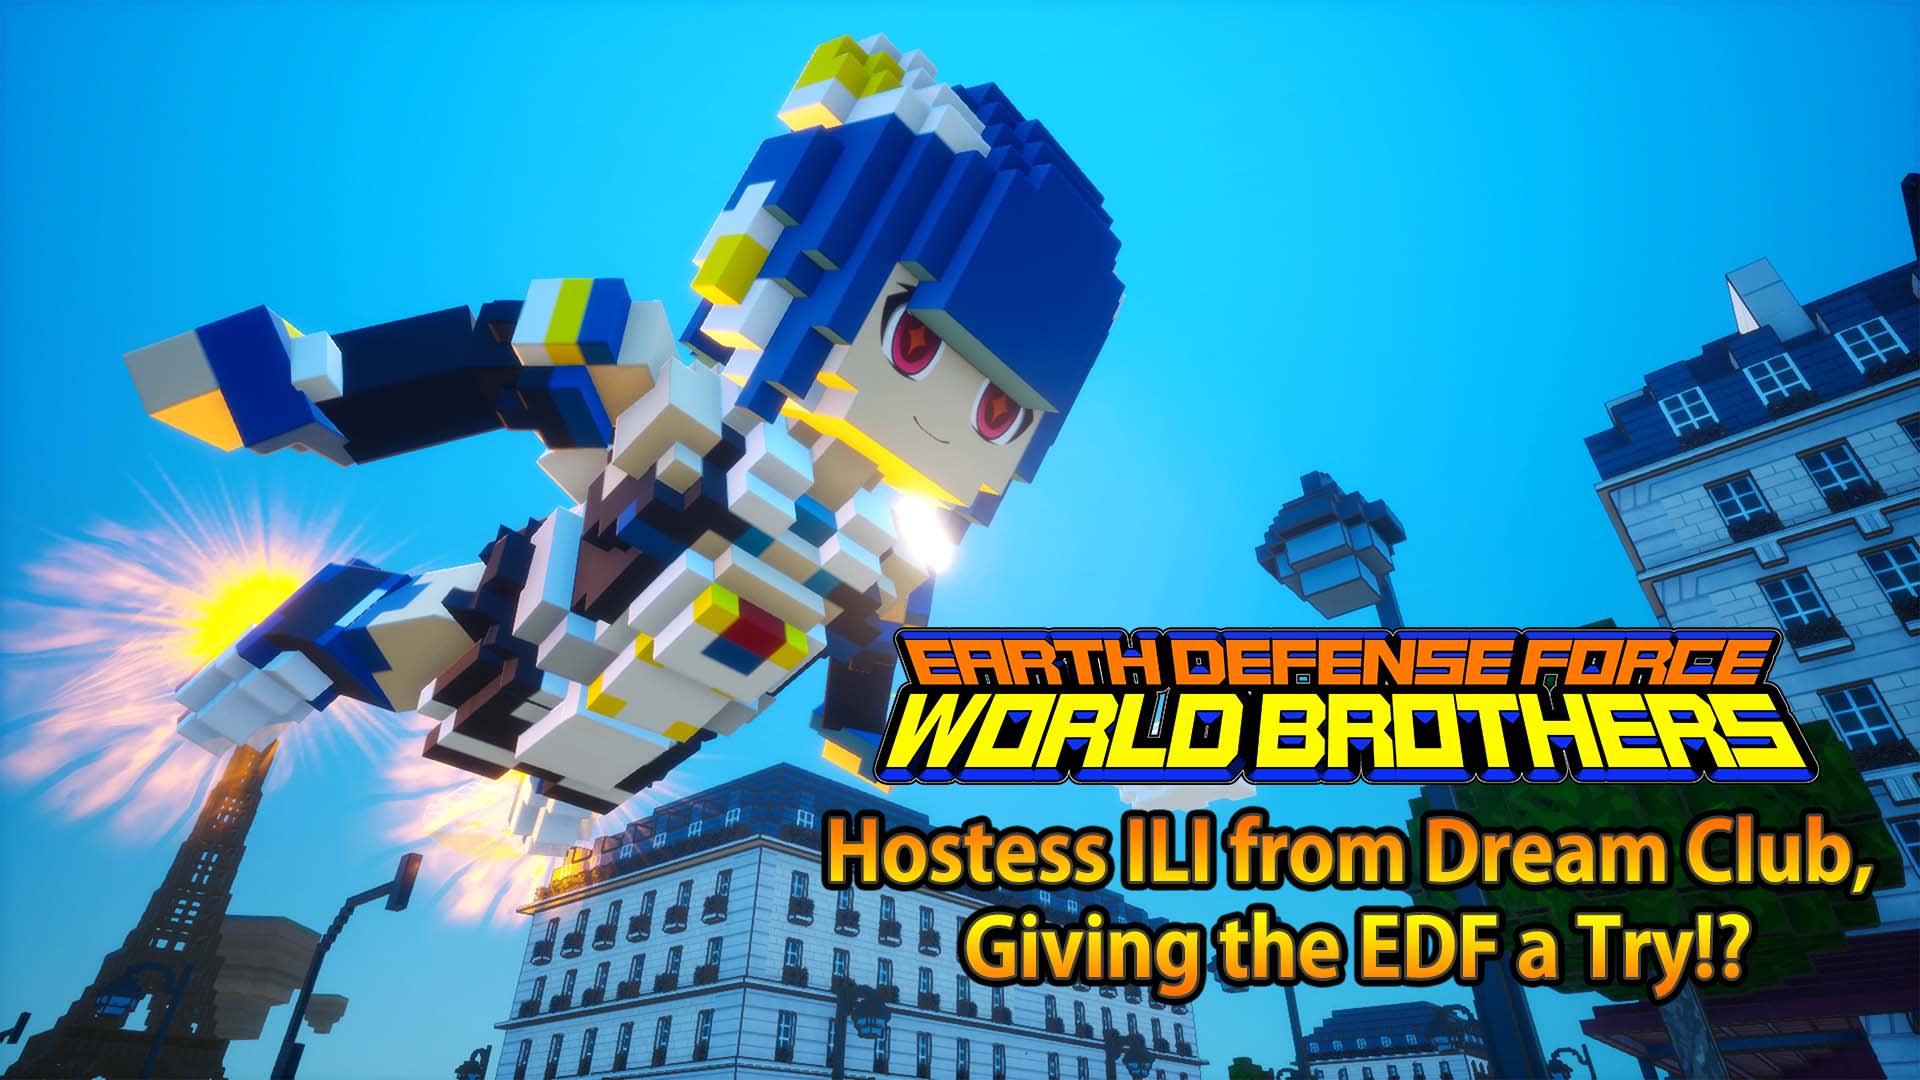 Hostess ILI from Dream Club, Giving the EDF a Try!?